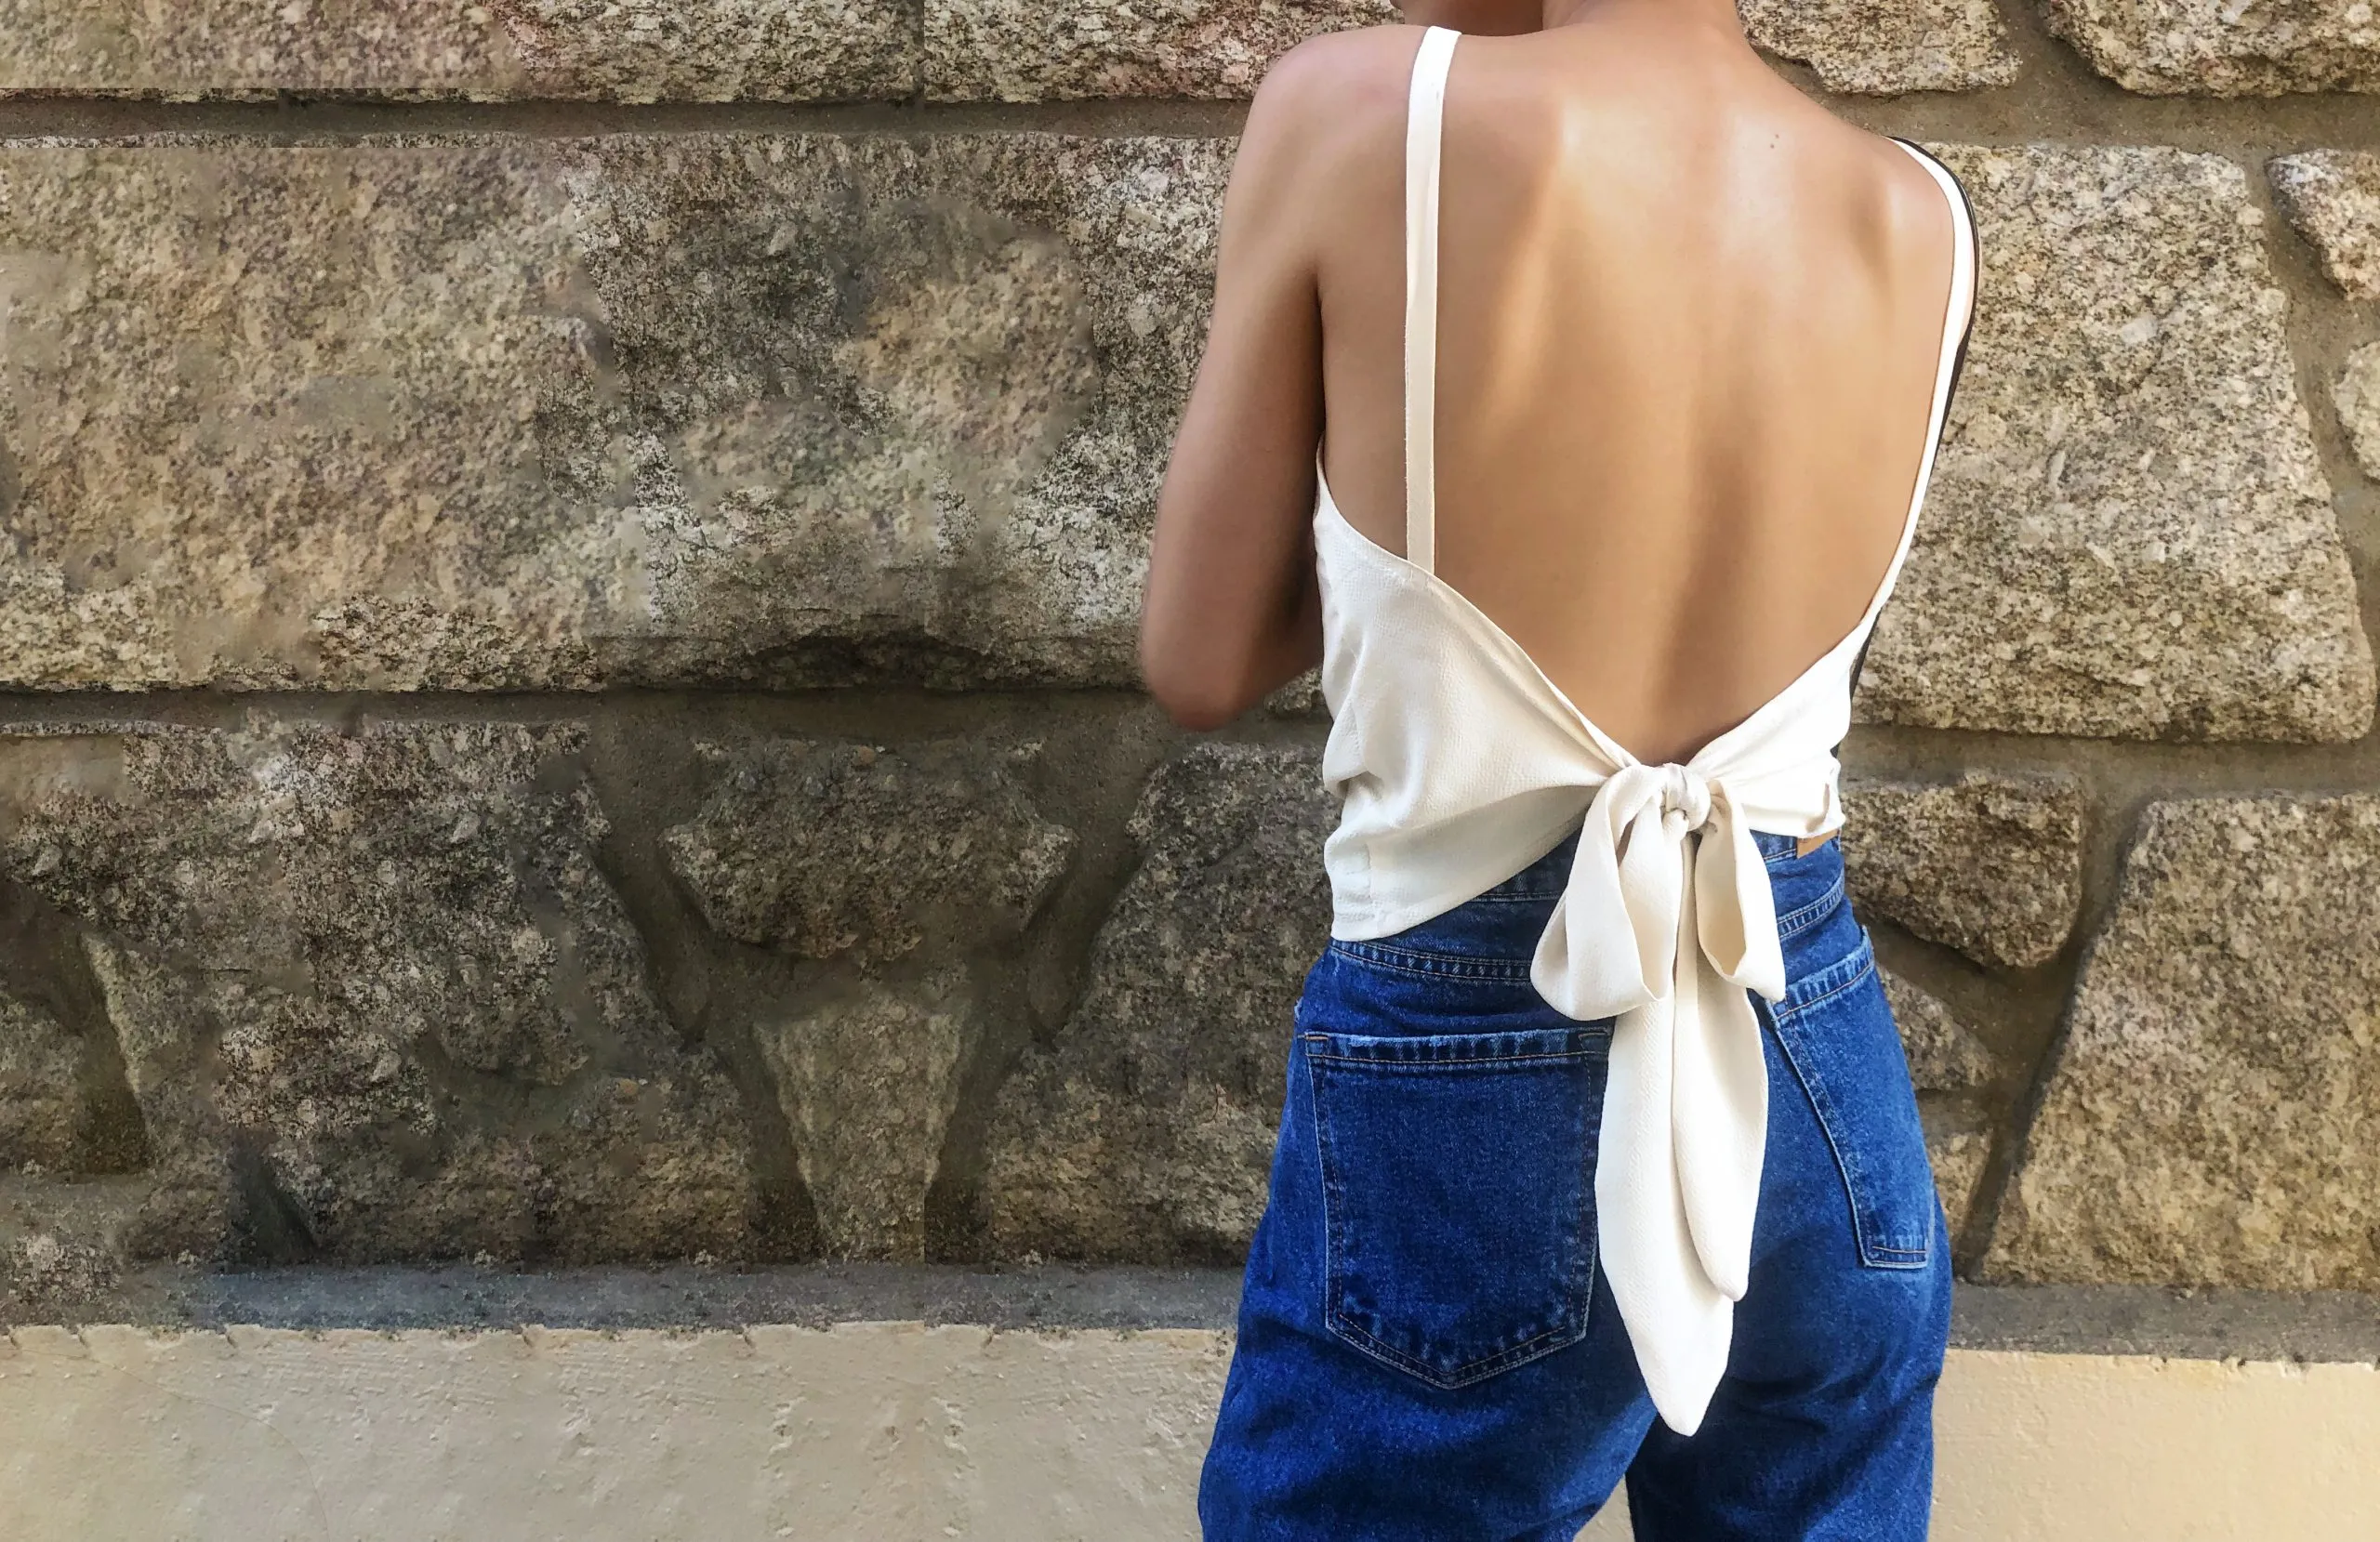 The Backless Top - Free Sewing Pattern For Women - Do It Yourself